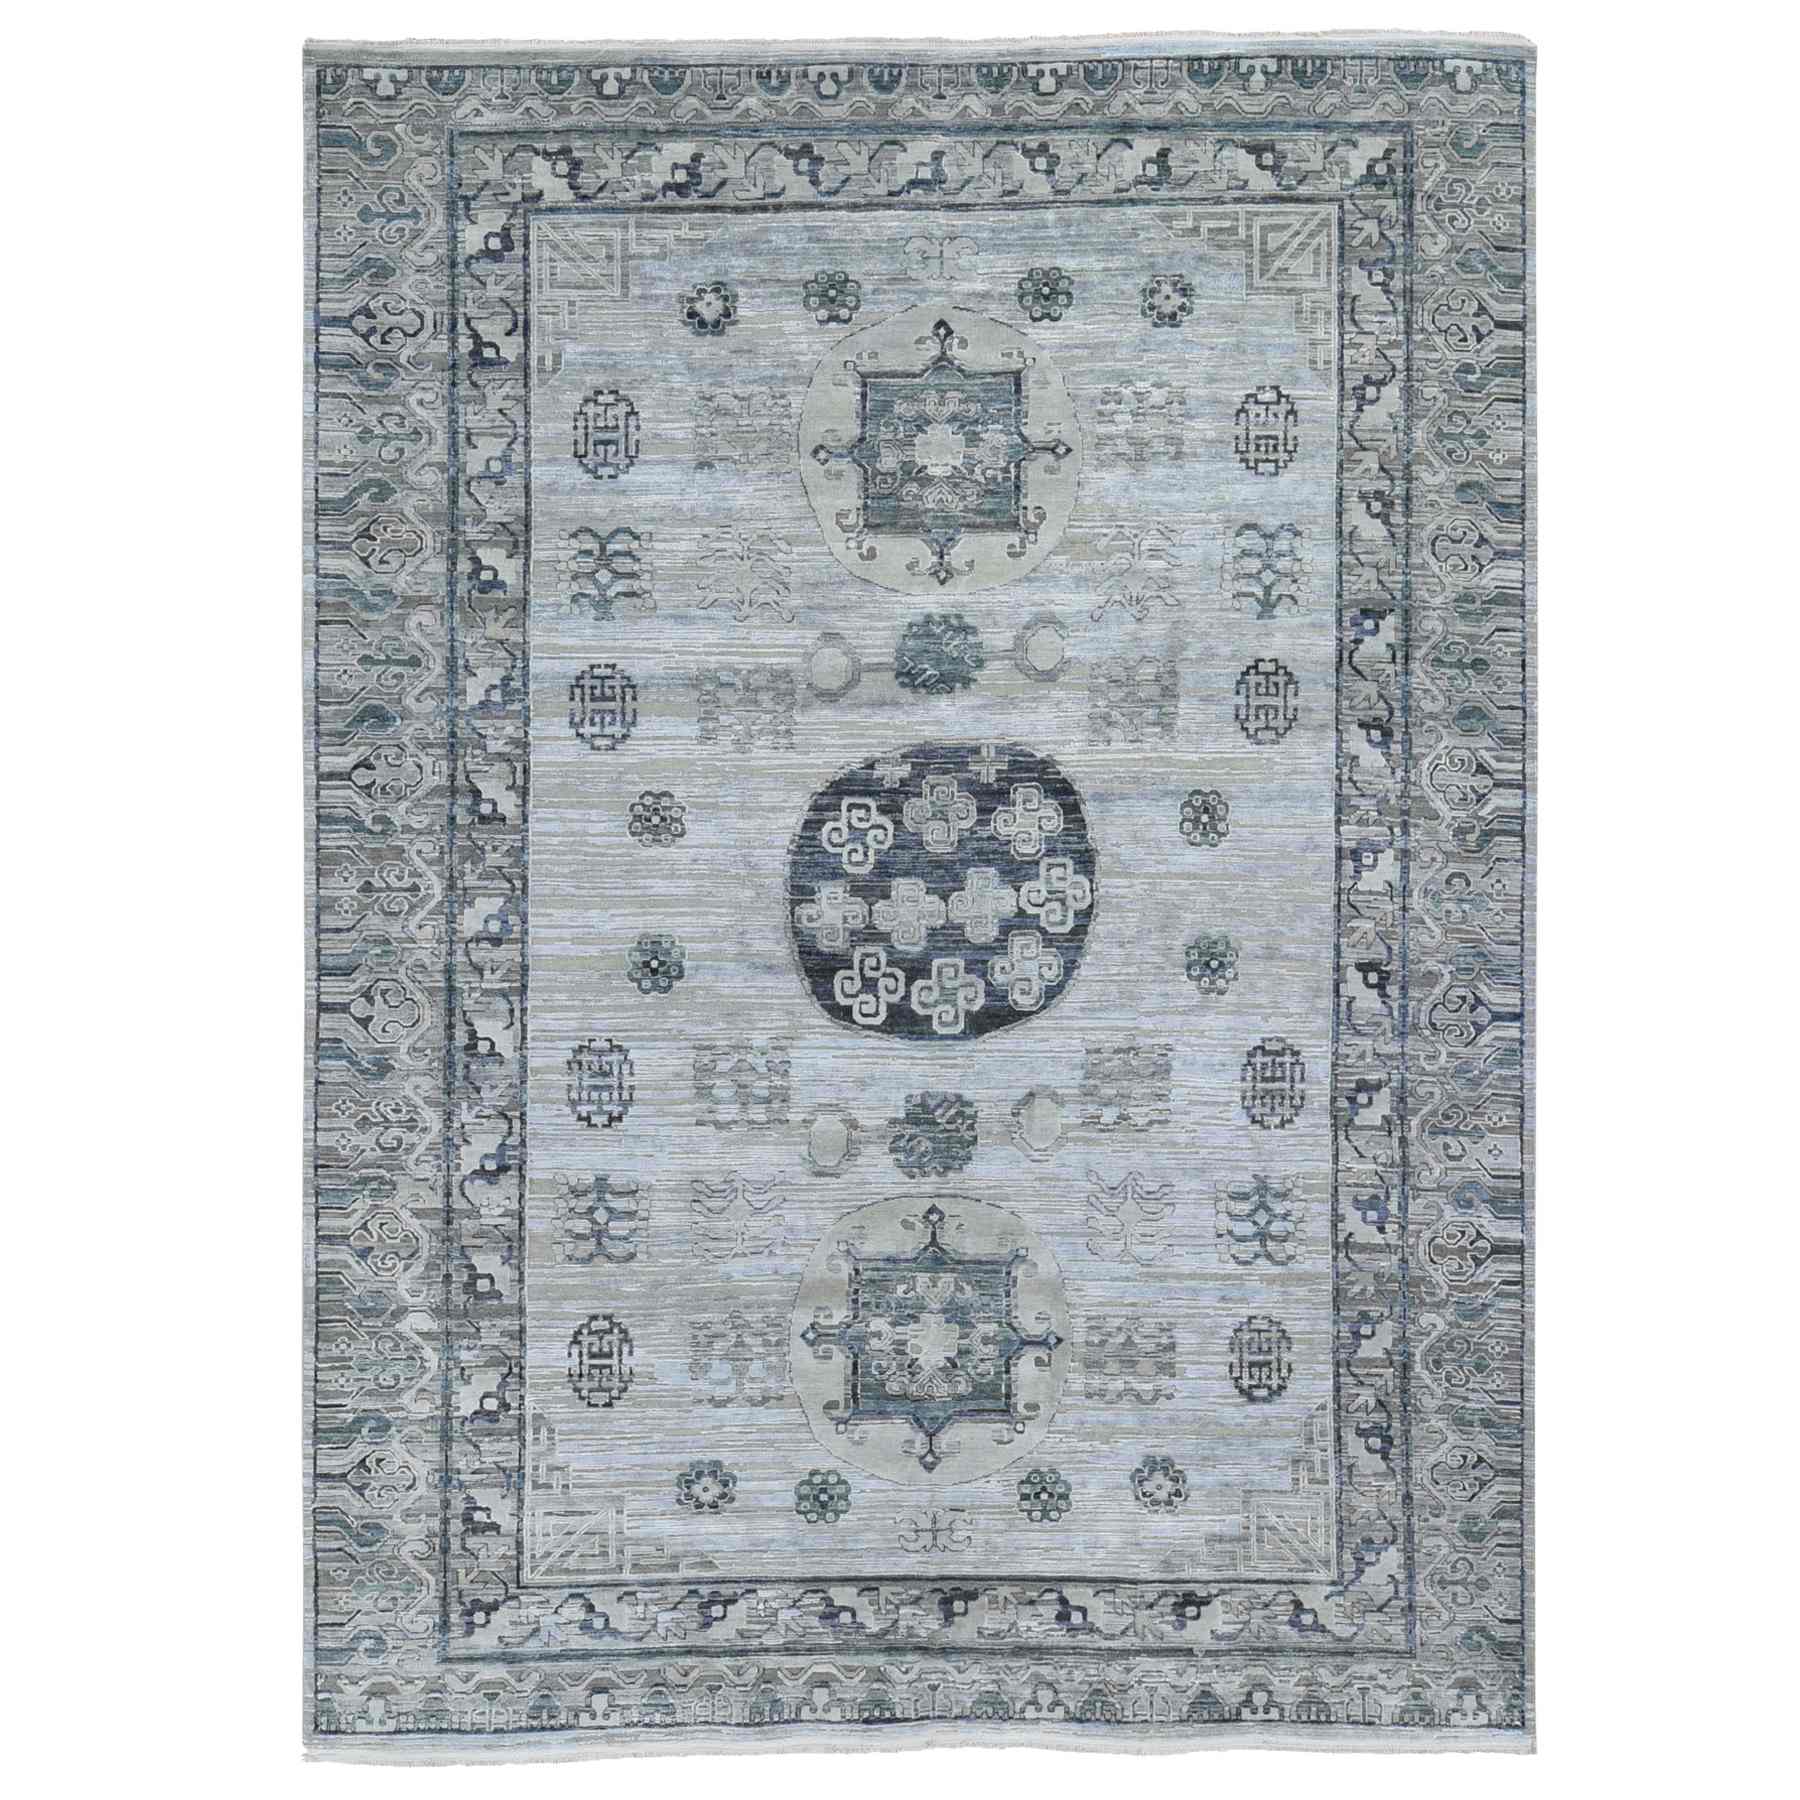 Wool-and-Silk-Hand-Knotted-Rug-296850